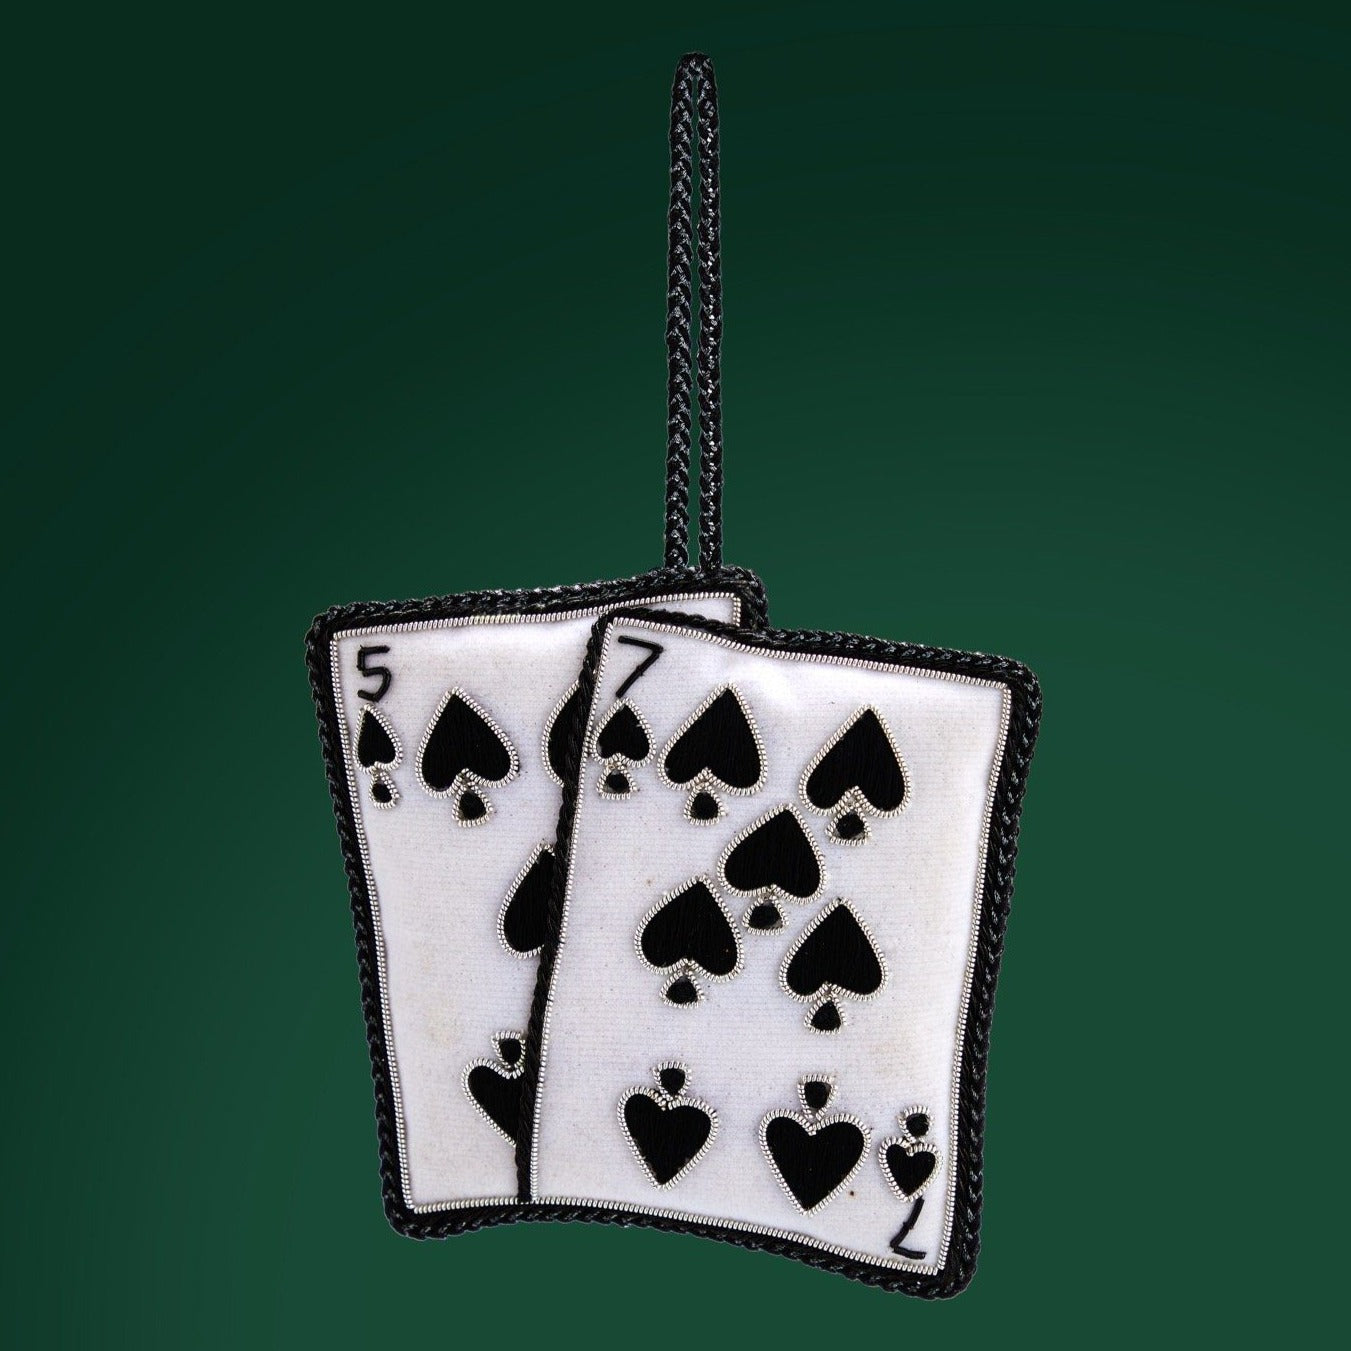 007 Christmas Decoration - White Velvet and Black Playing Cards DECORATION Tinker Tailor 